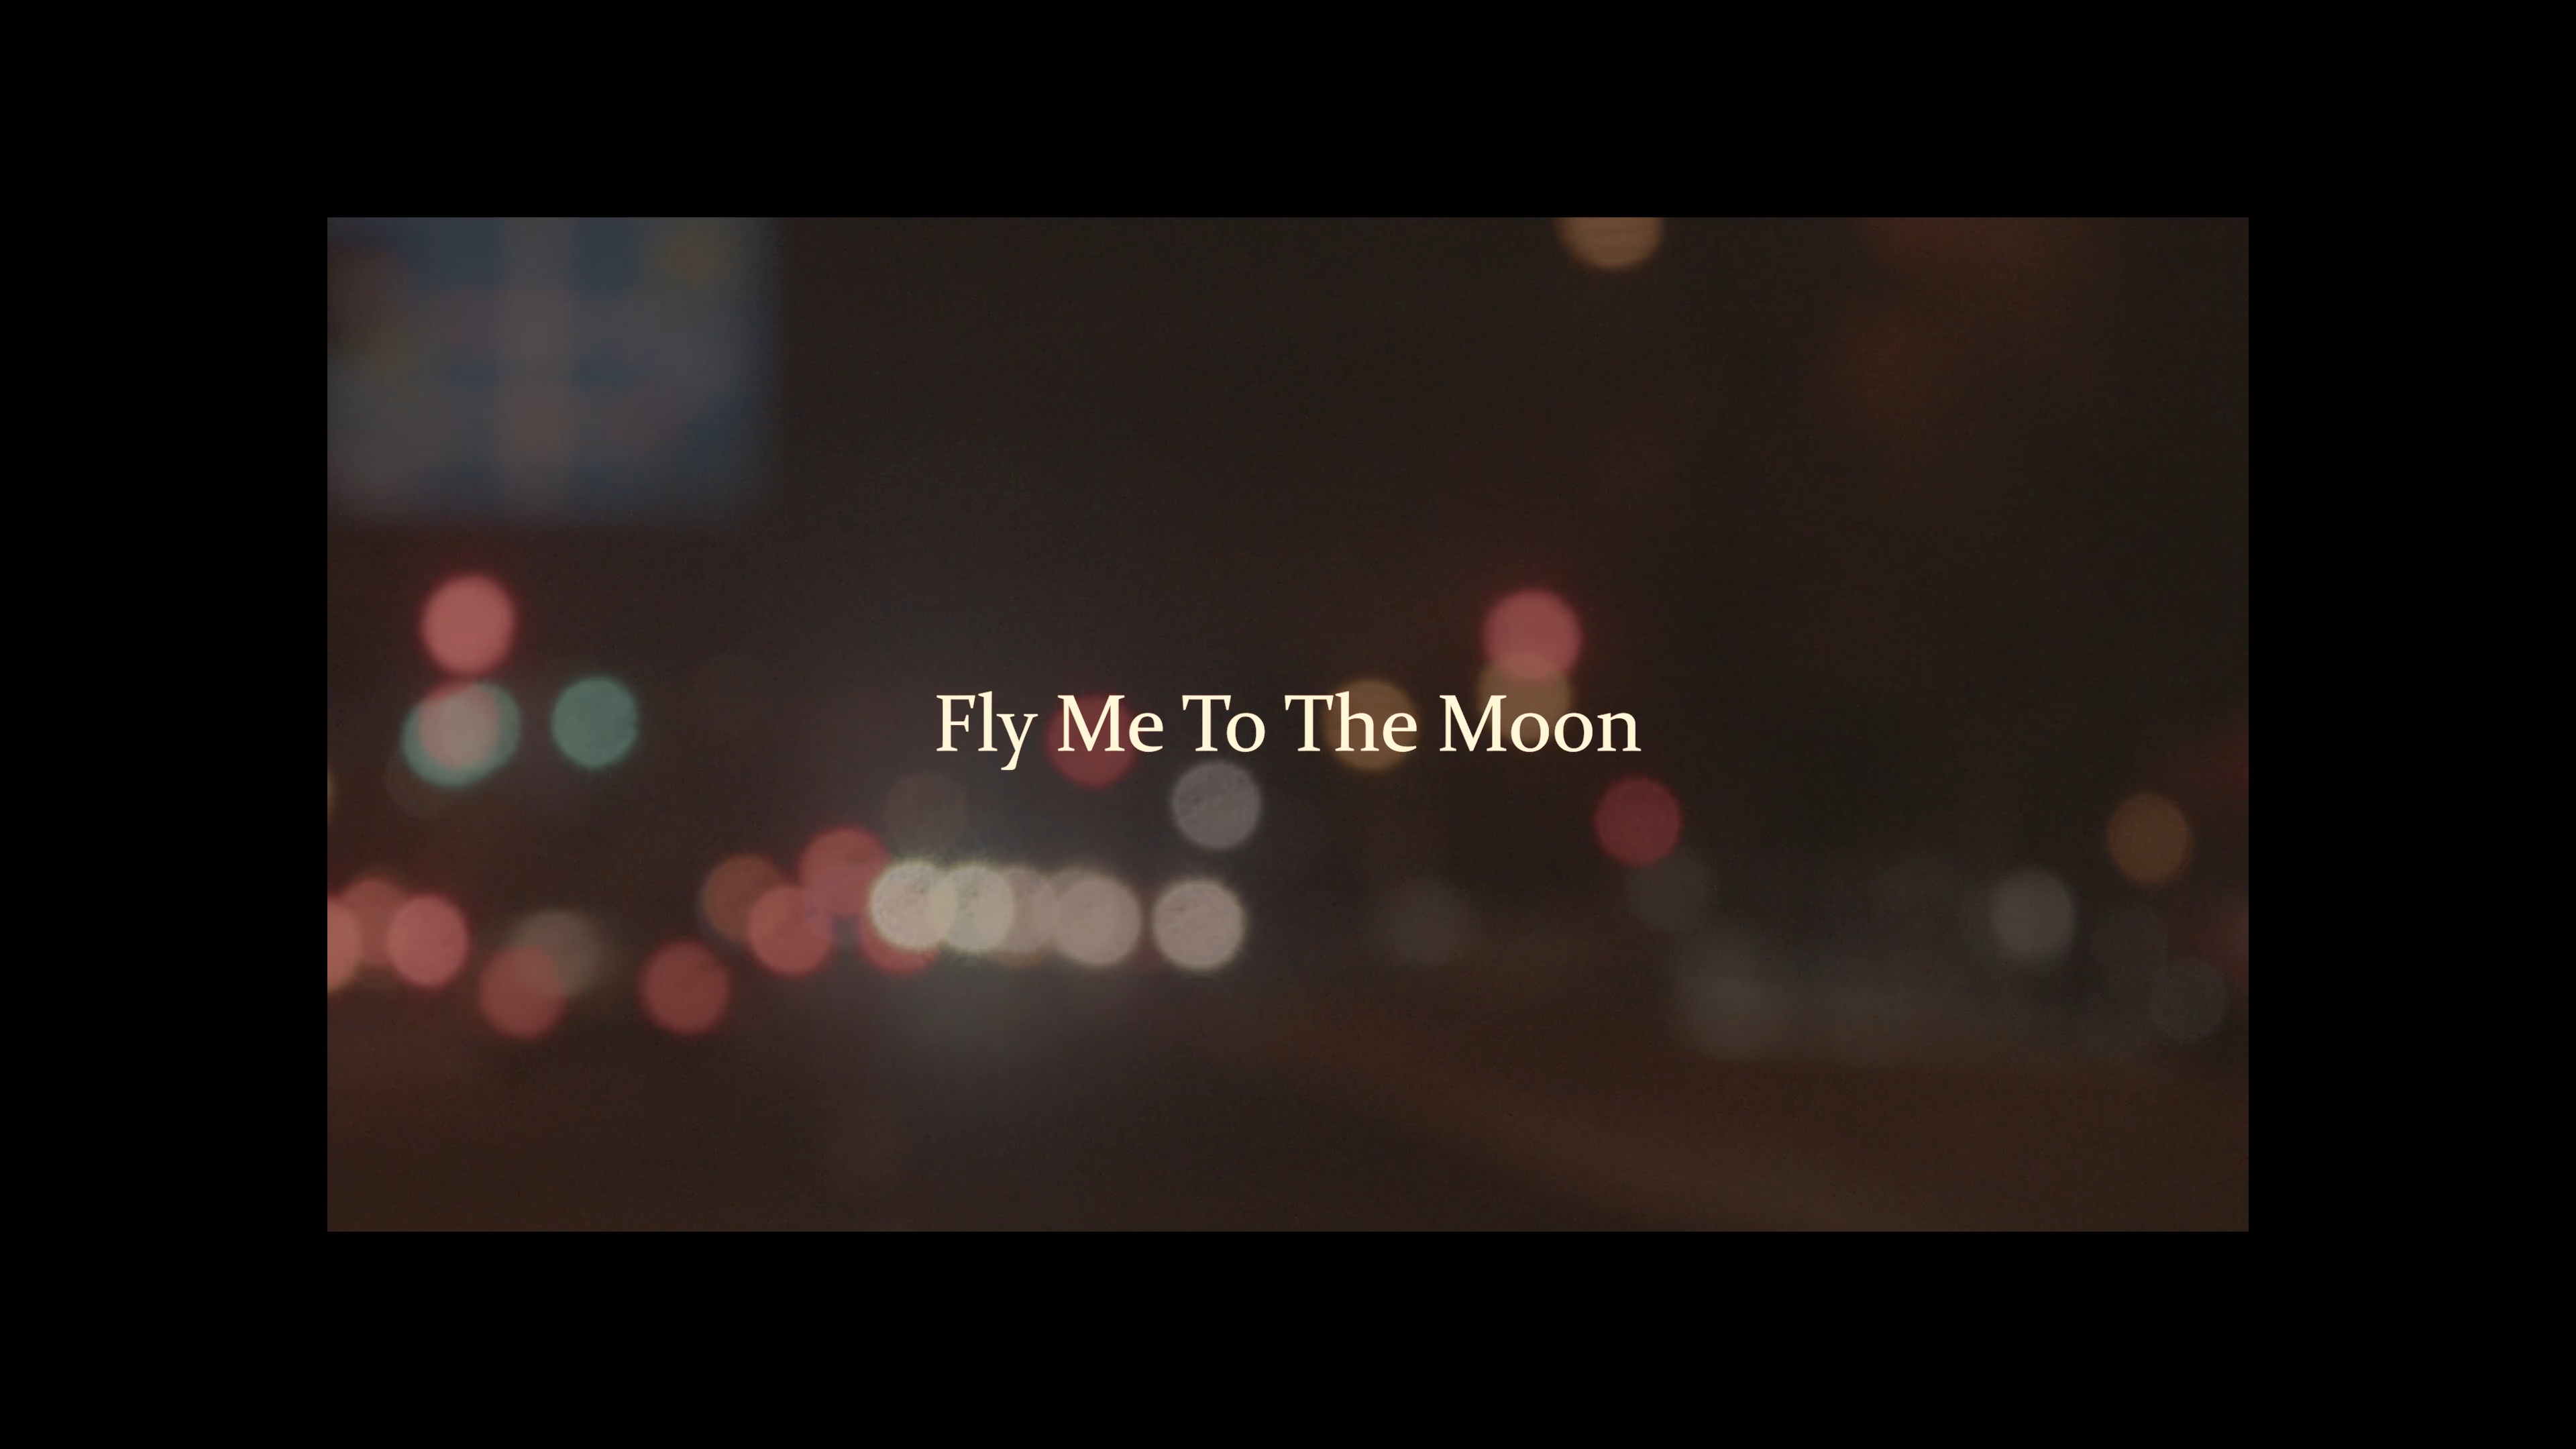 TOKYO JAZZ BANQUET Vol.2 “ Fly Me To The Moon ”